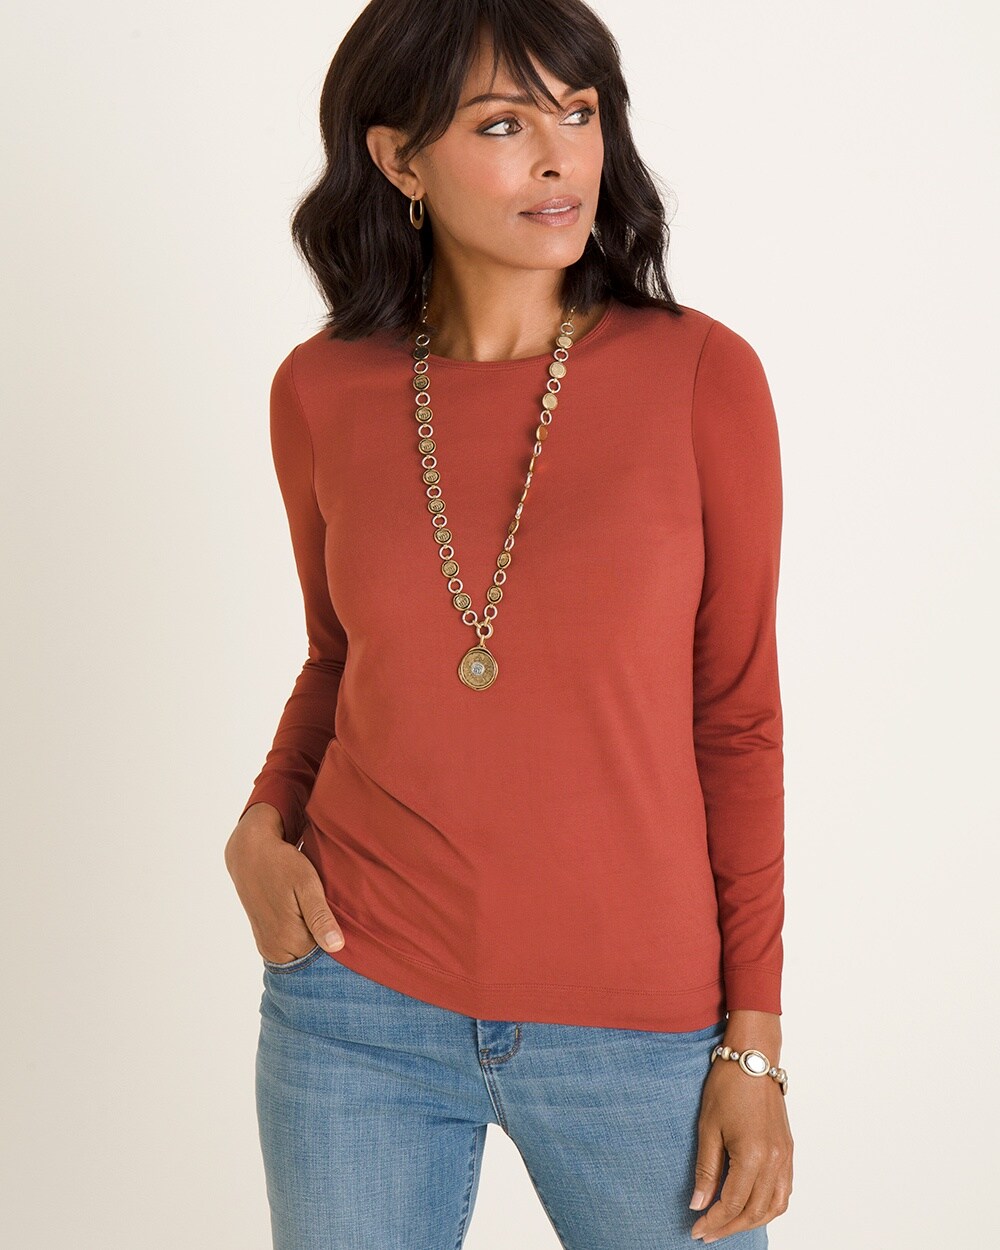 Essential Layer Top